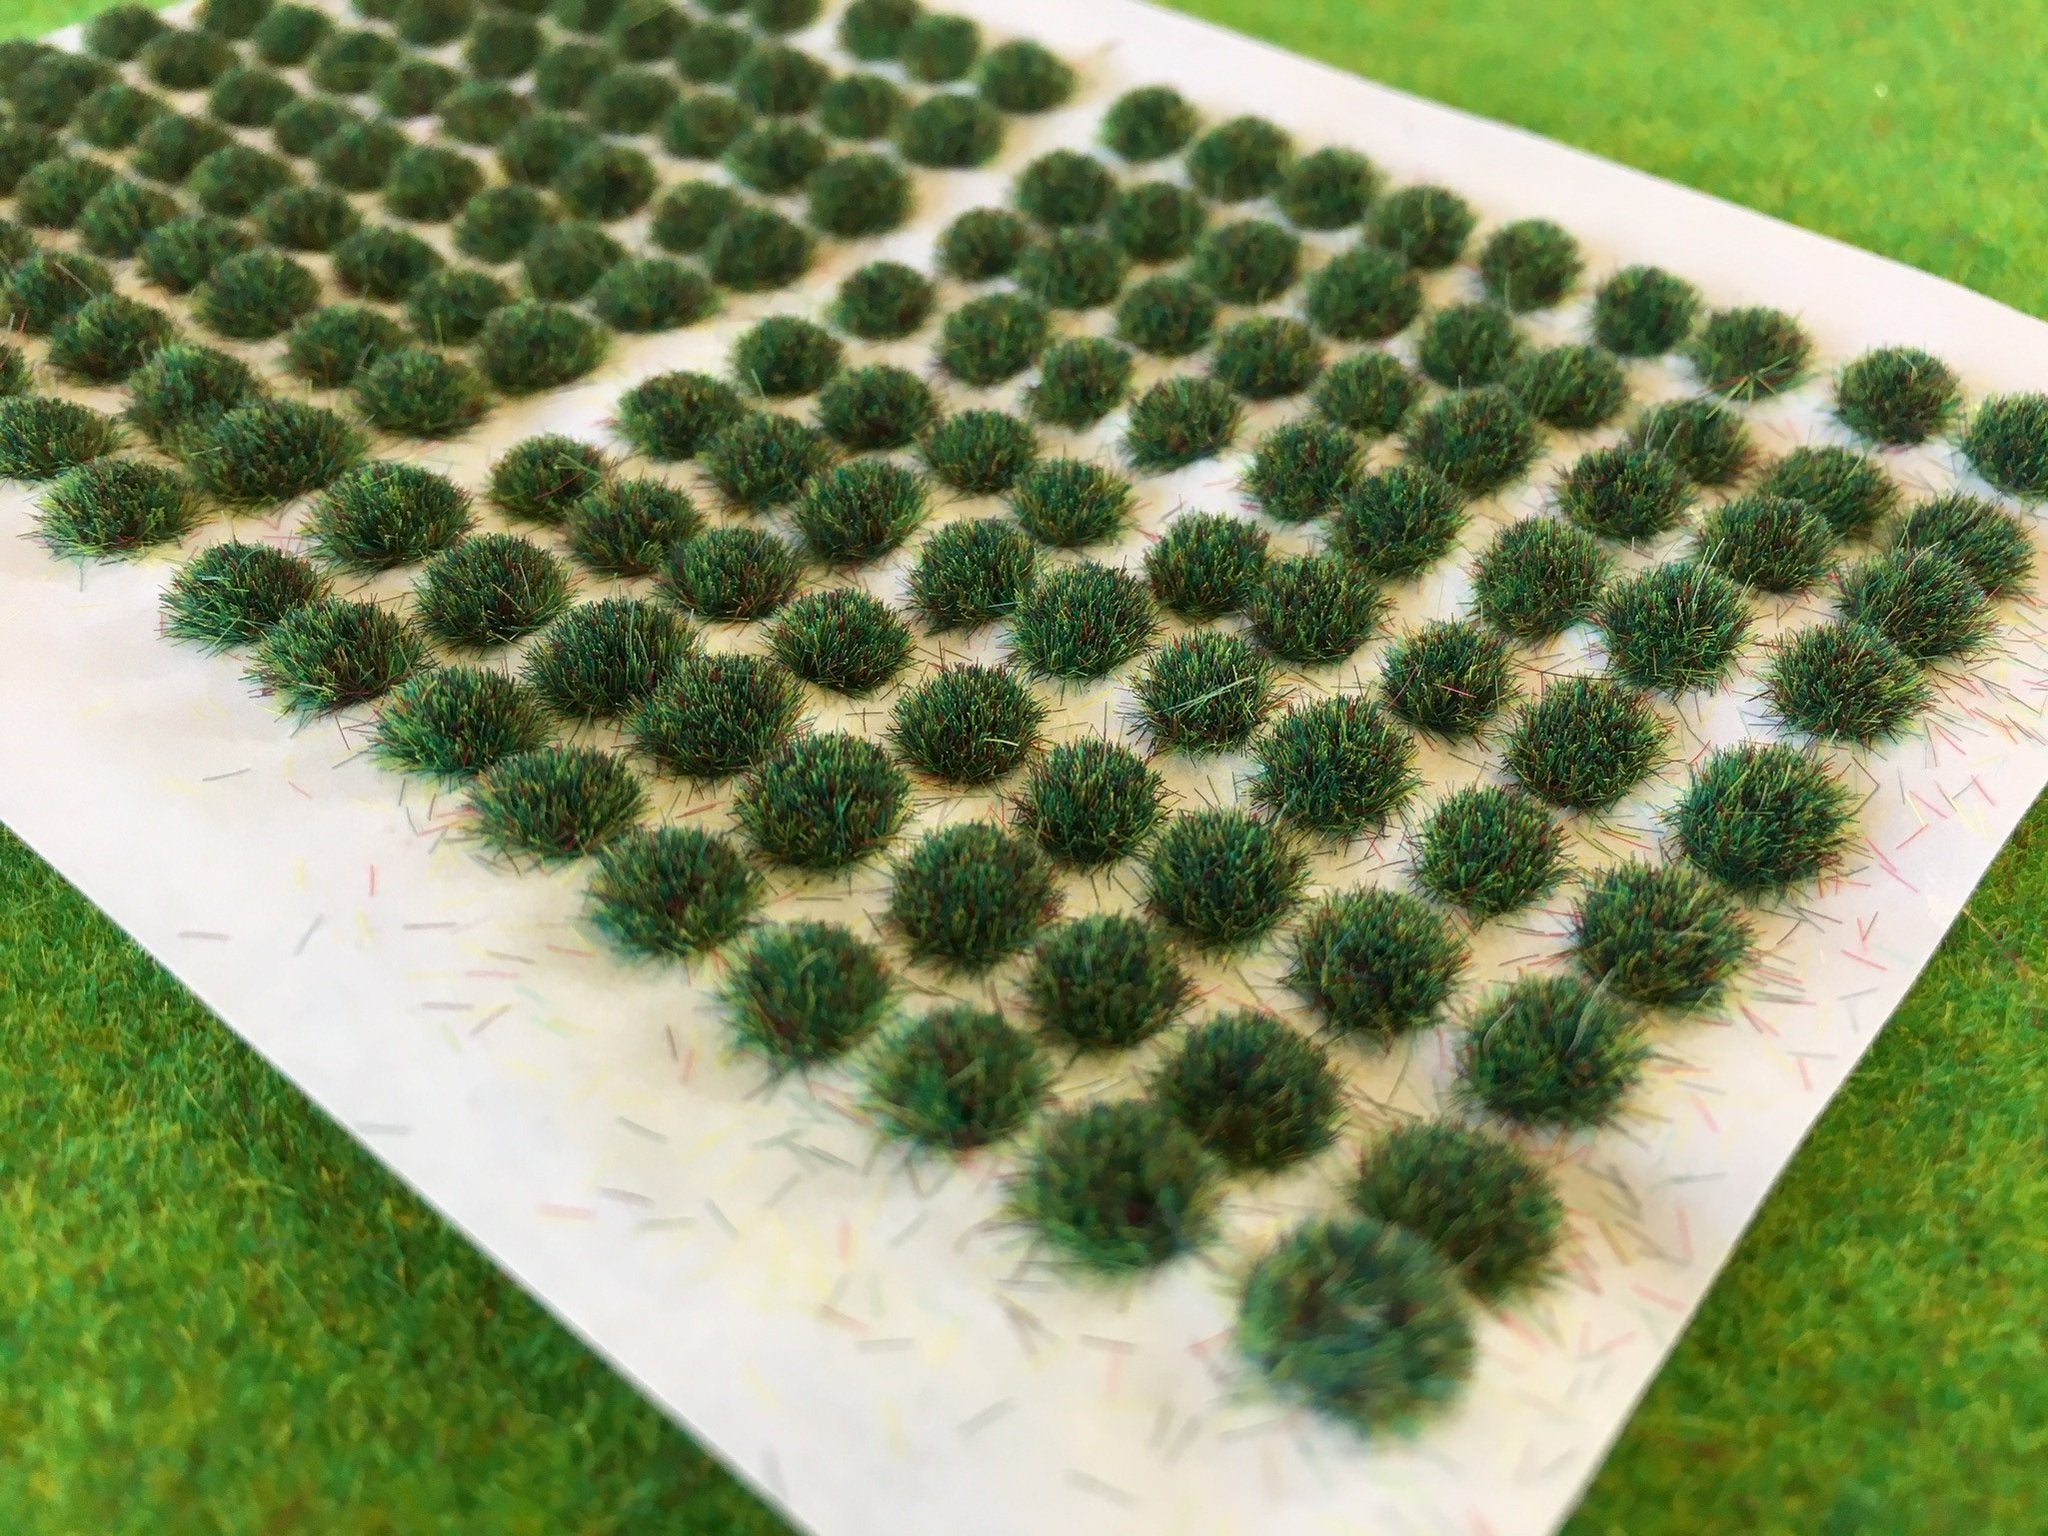 WWS, 10mm Summer Static Grass, CHOOSE SIZE, Model Scenery Material